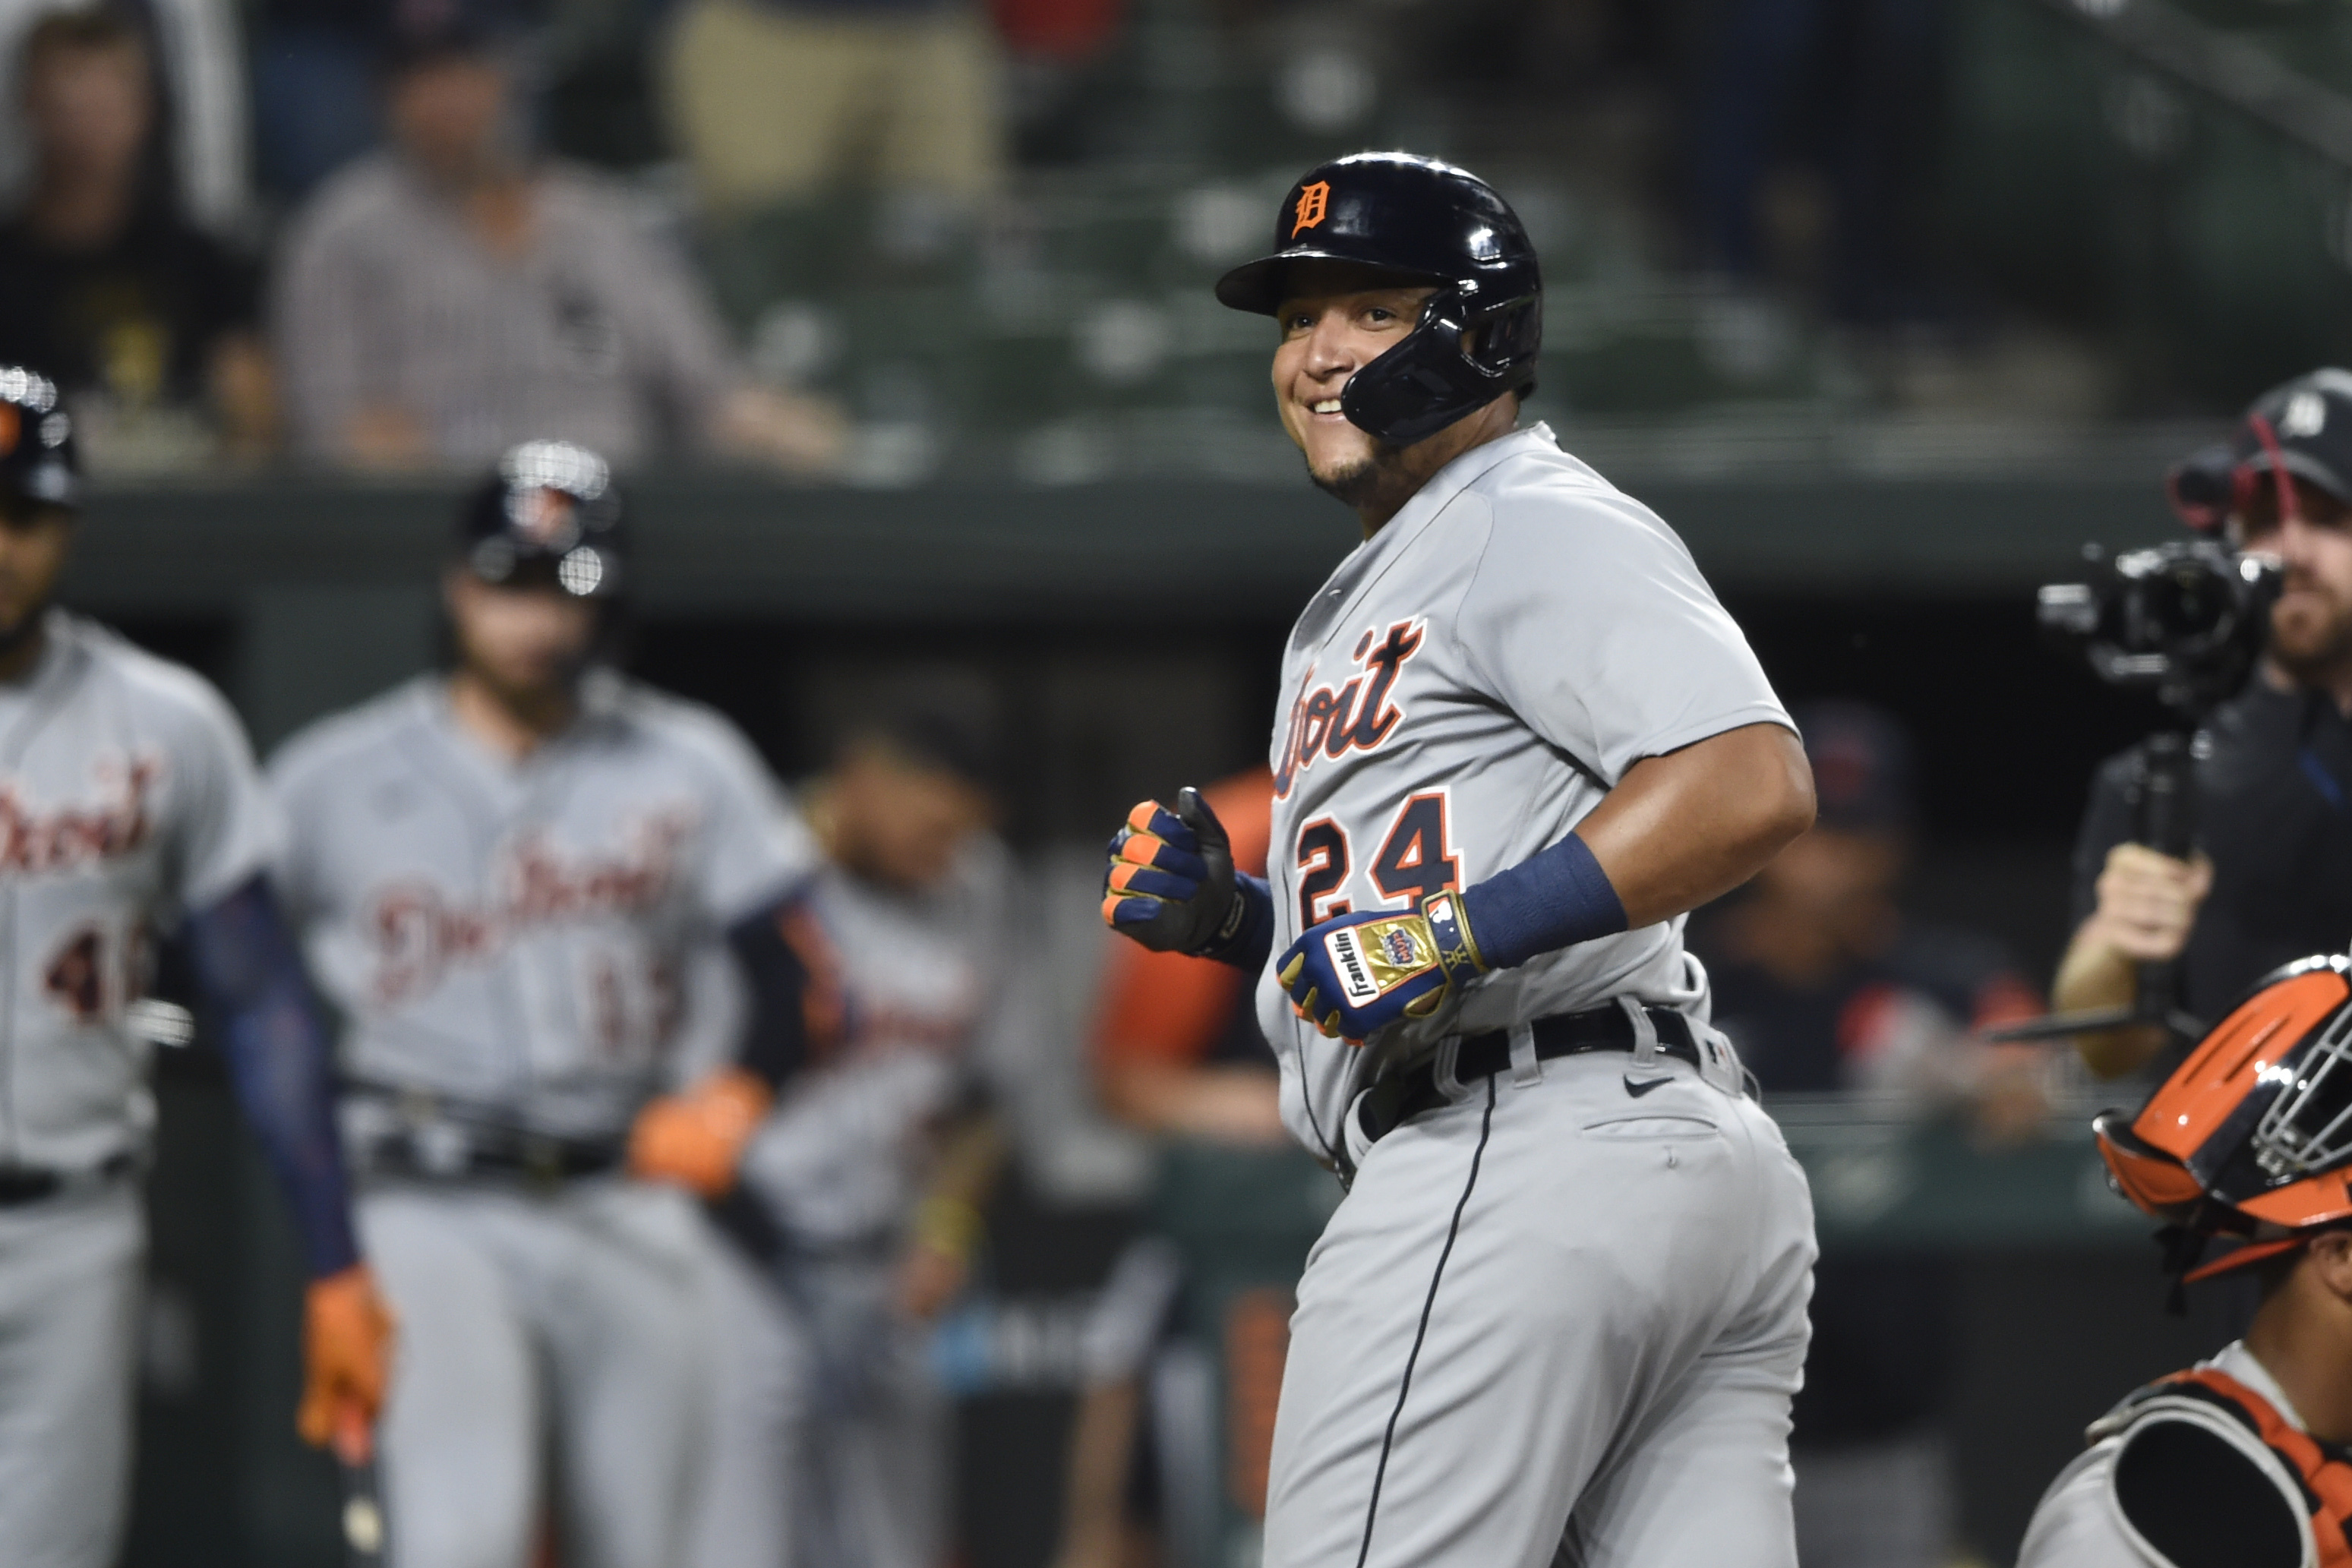 Nightside Report Aug. 22, 2021: Miguel Cabrera joins 500 home run club,  Michigan prepares to house refugees, list of schools with mask mandates  grows